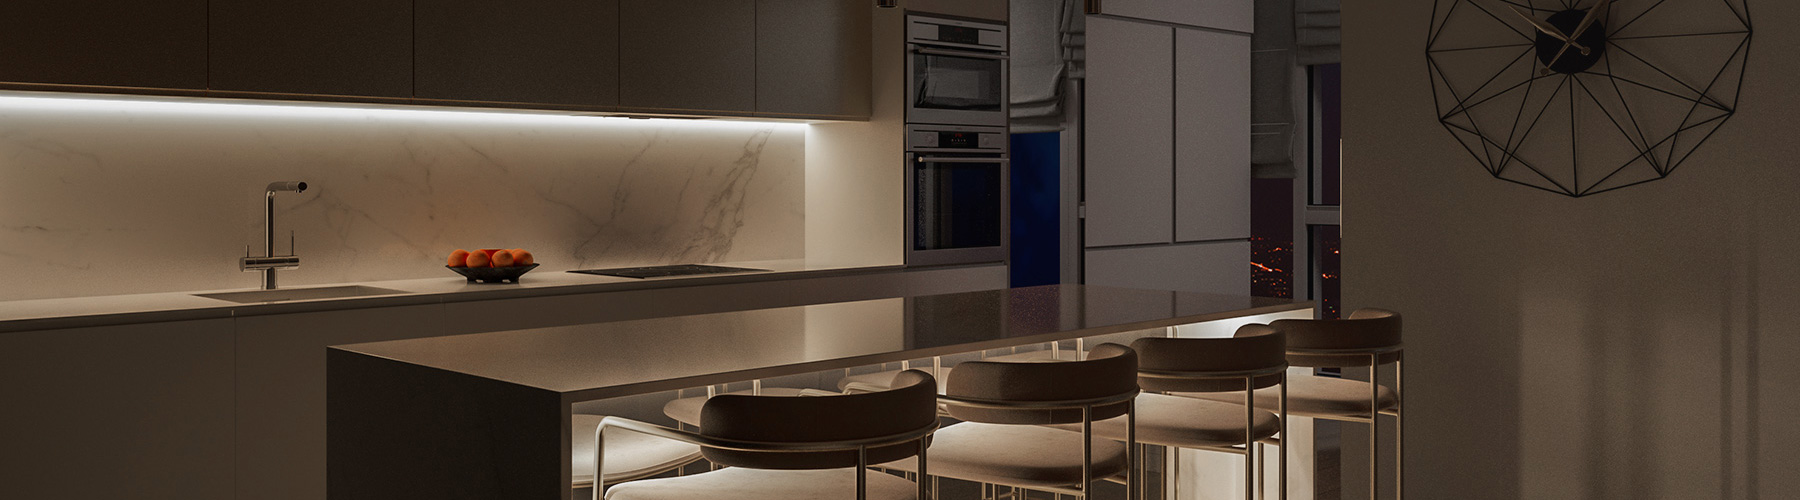 Kitchen lighting - Elson Electrical Cheshire - Image